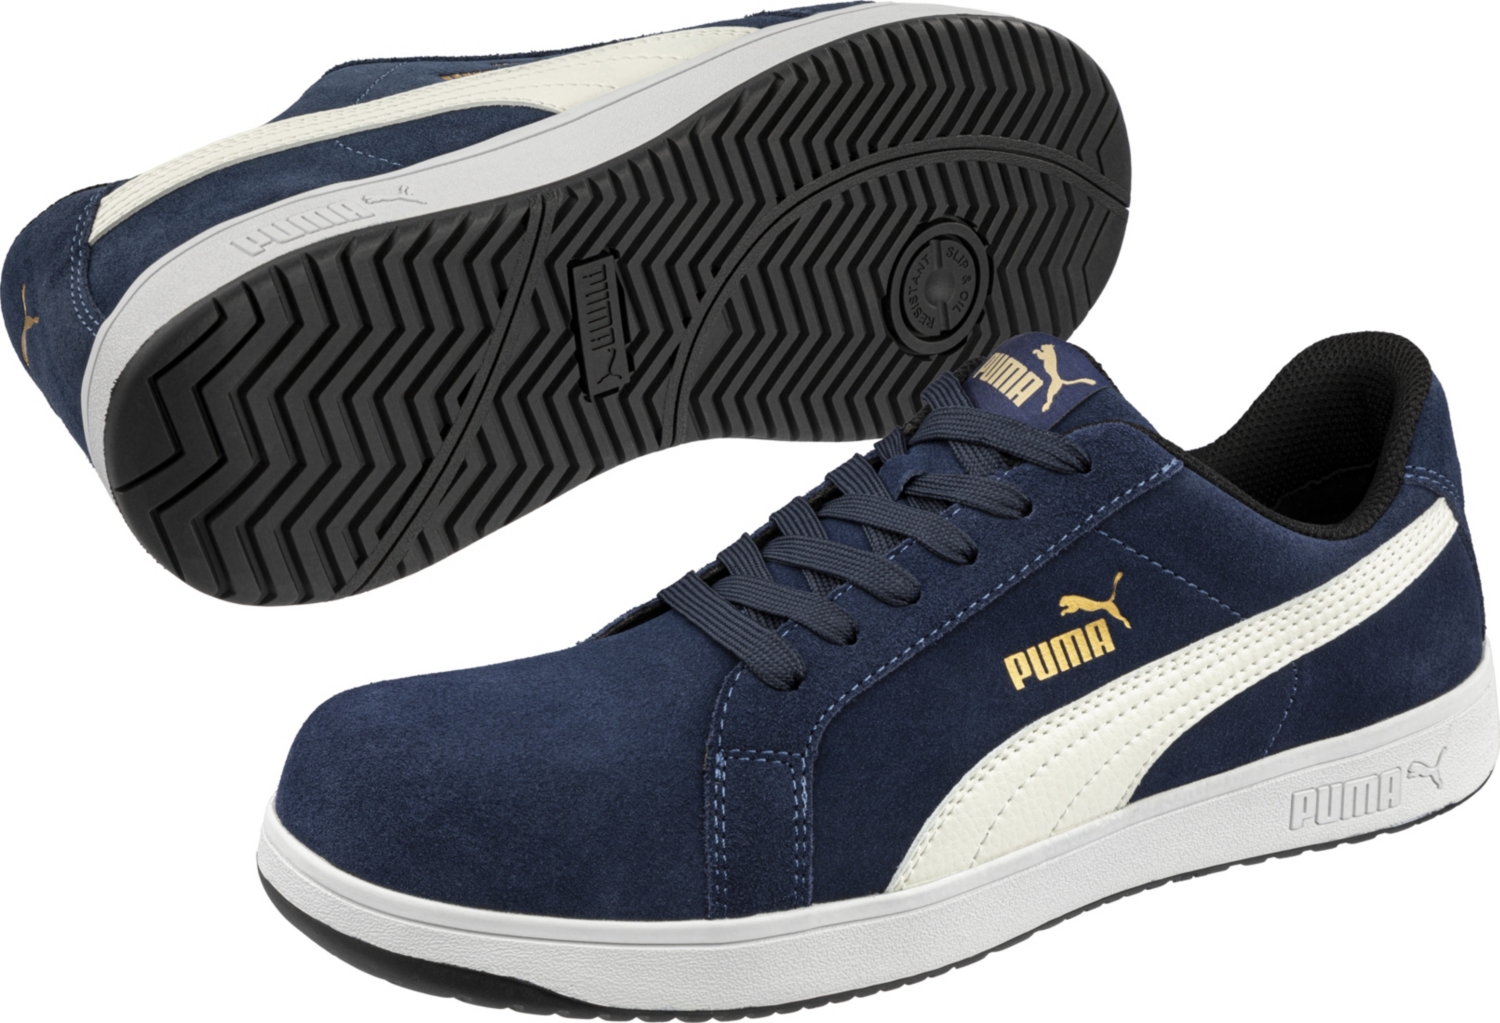 Chaussures basses Iconic - Bleu - S1PL ESD FO HRO SR Puma Safety